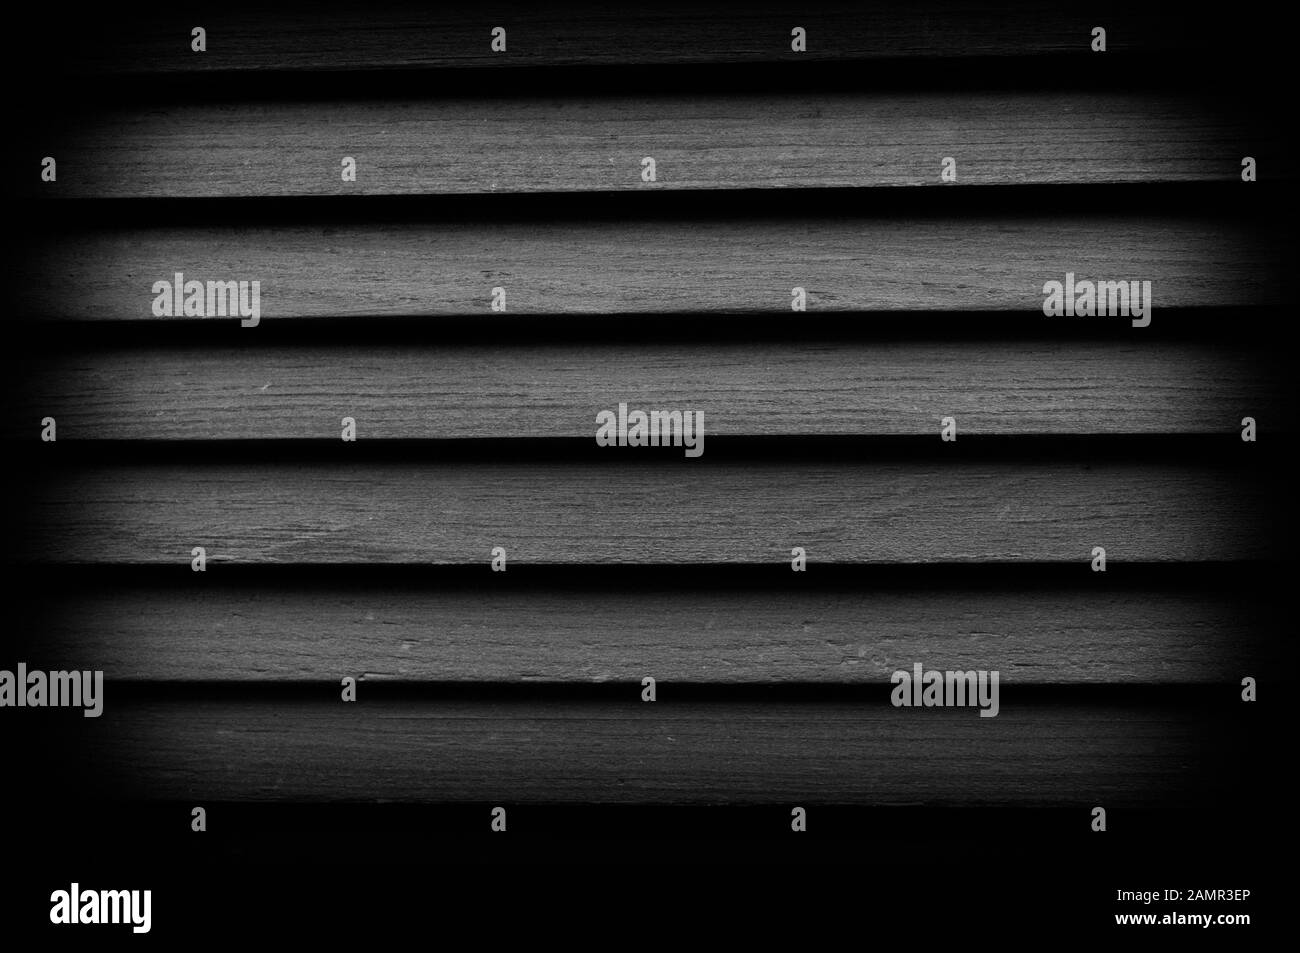 Texture of wooden blinds with vignetting. Great background for any use. Black and white photo. Stock Photo